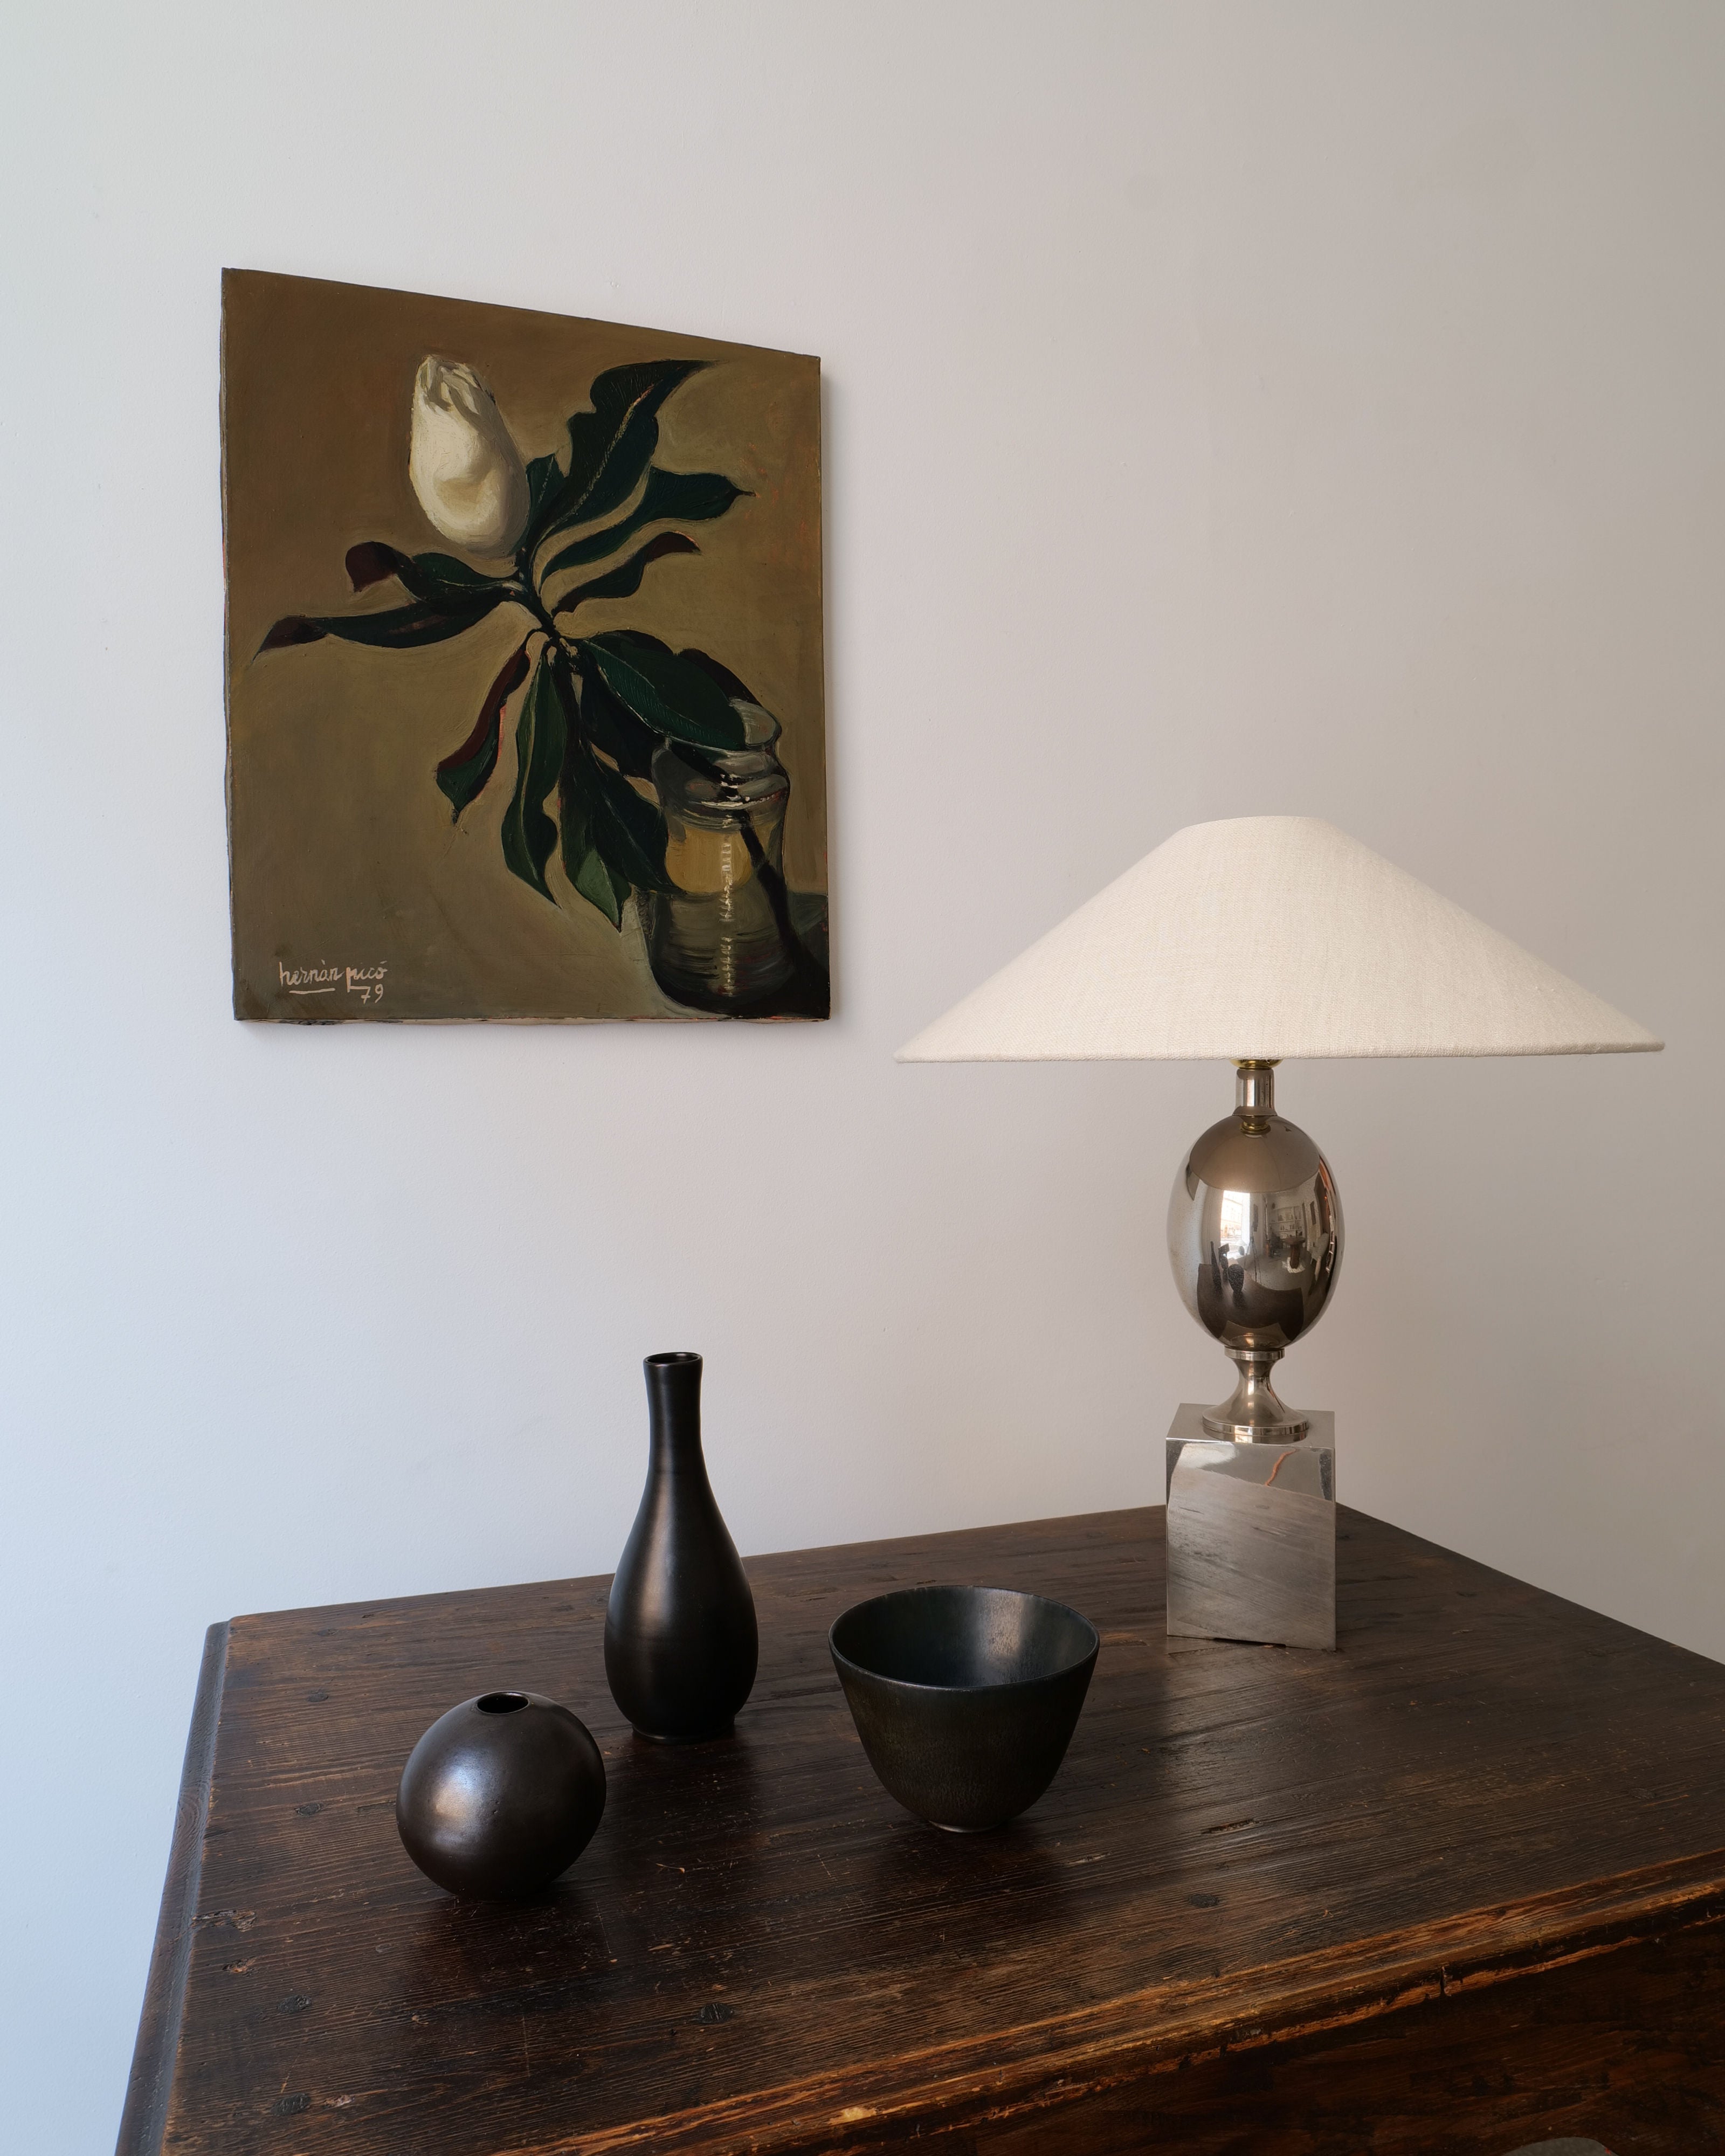 A rustic wooden table displaying a oil on canvas painting of a Magnolia Grandiflora 1979 stem in a jar, a silver table lamp with a white shade, and a black vase accompanied by a black bowl.